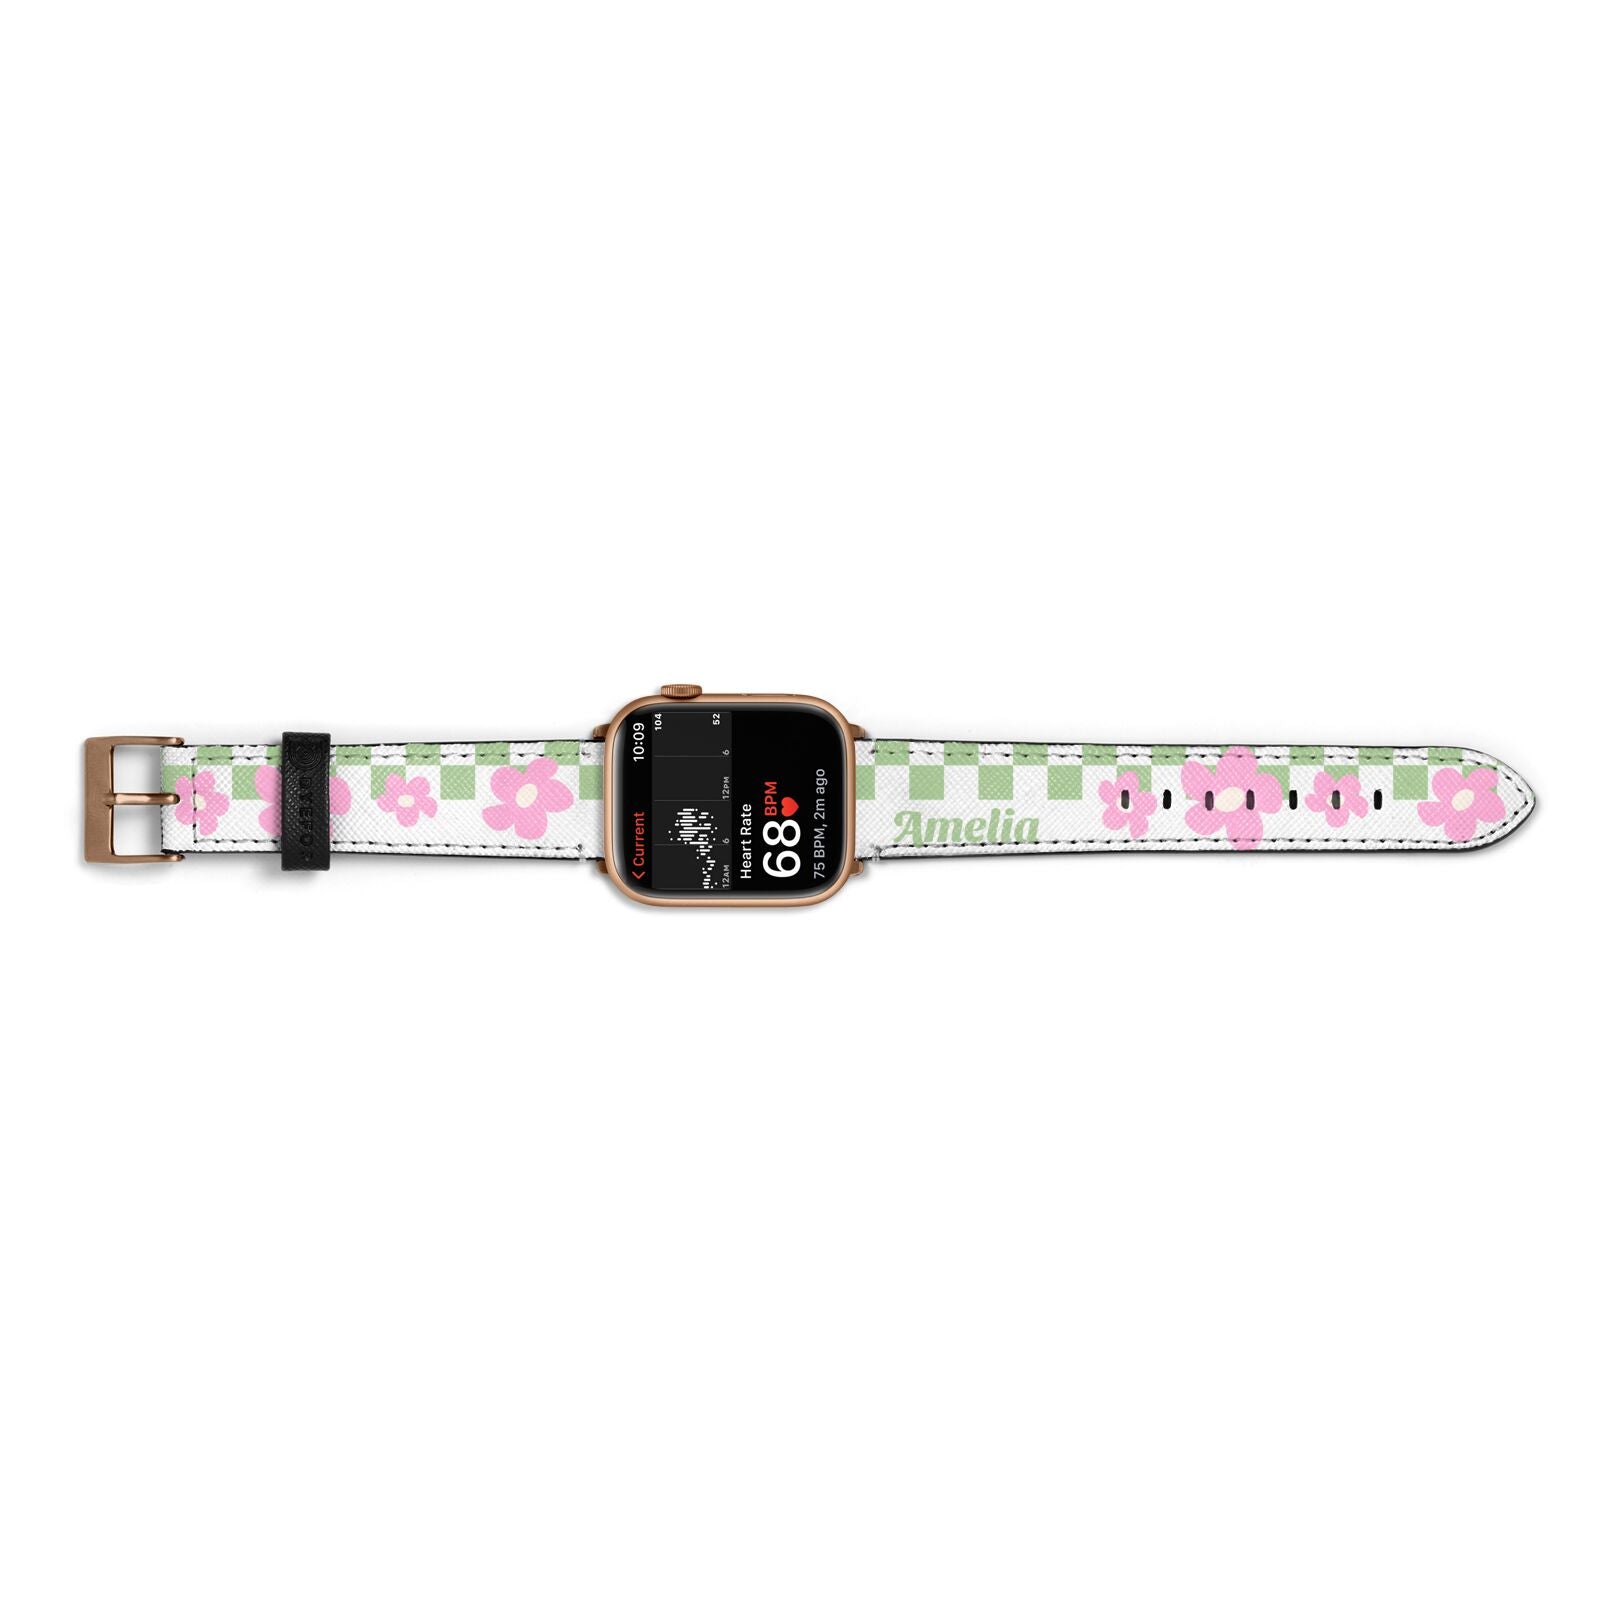 Personalised Check Floral Apple Watch Strap Size 38mm Landscape Image Gold Hardware